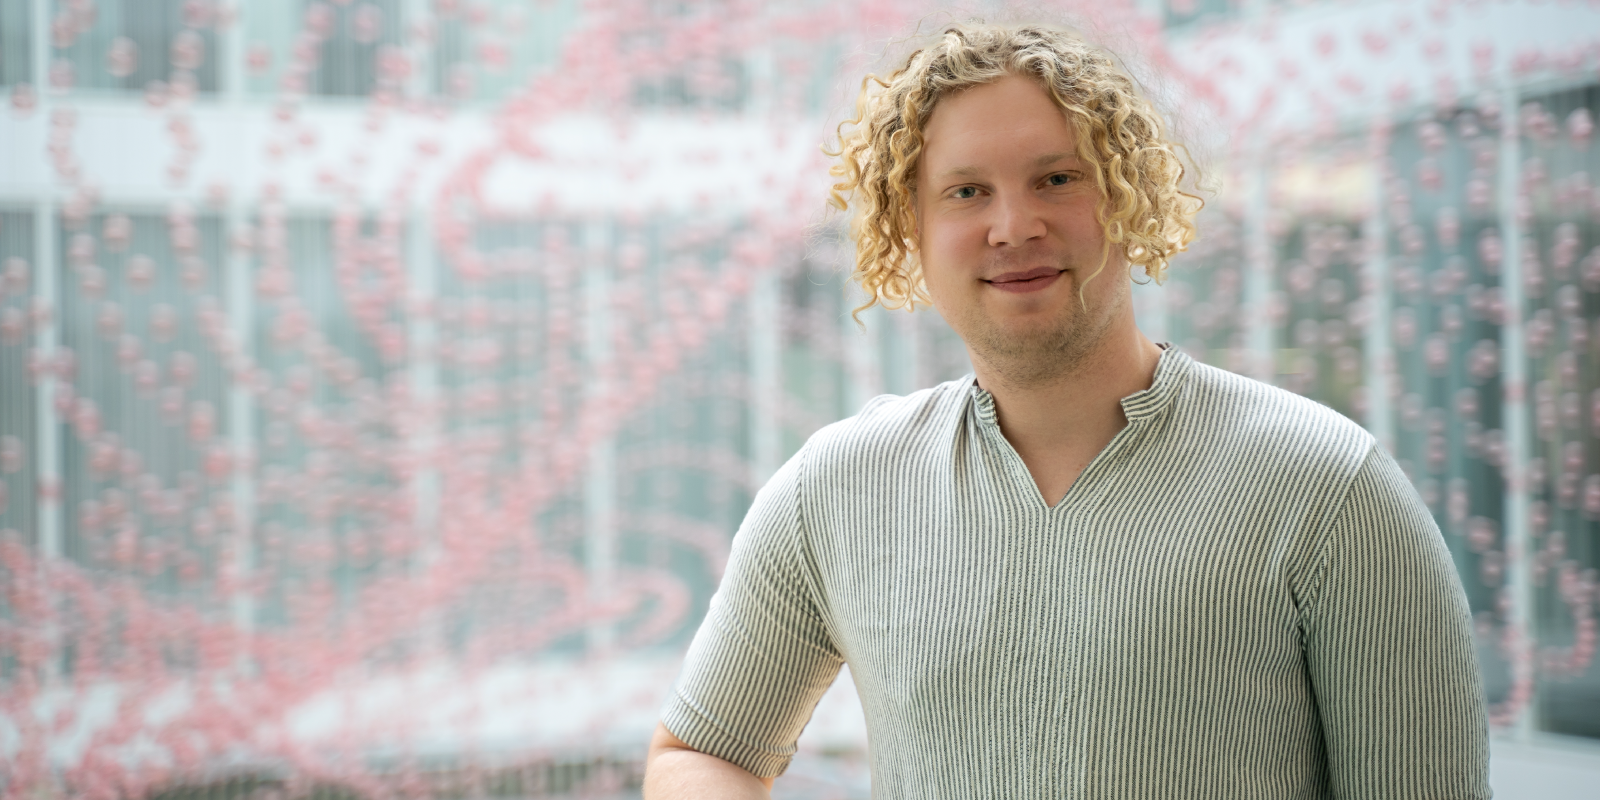 Portrait of Tim Rädsch, part of the Research Unit at DKFZ